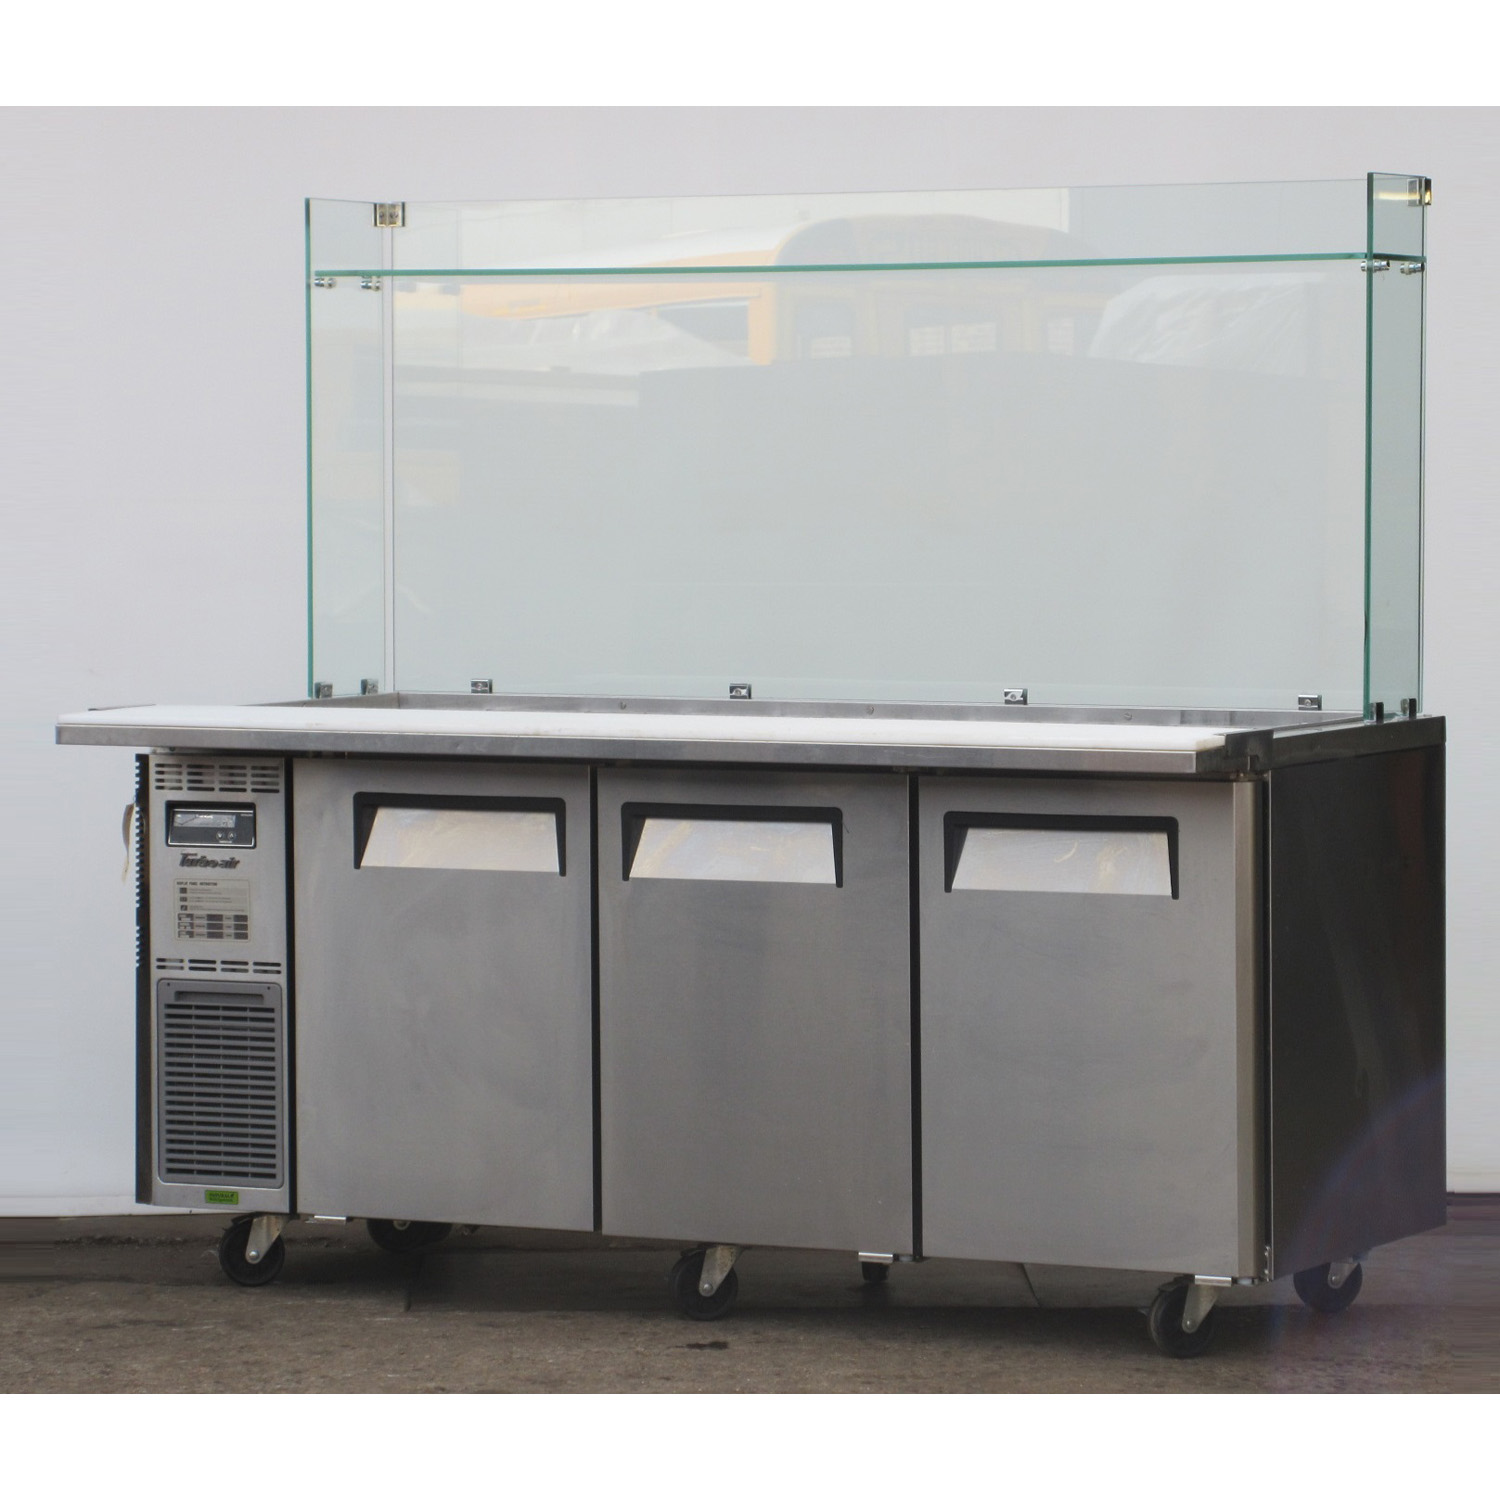 Turbo Air JBT-72-N 72'' Salad Bar W/Sneeze Guard, Used Excellent Condition image 1